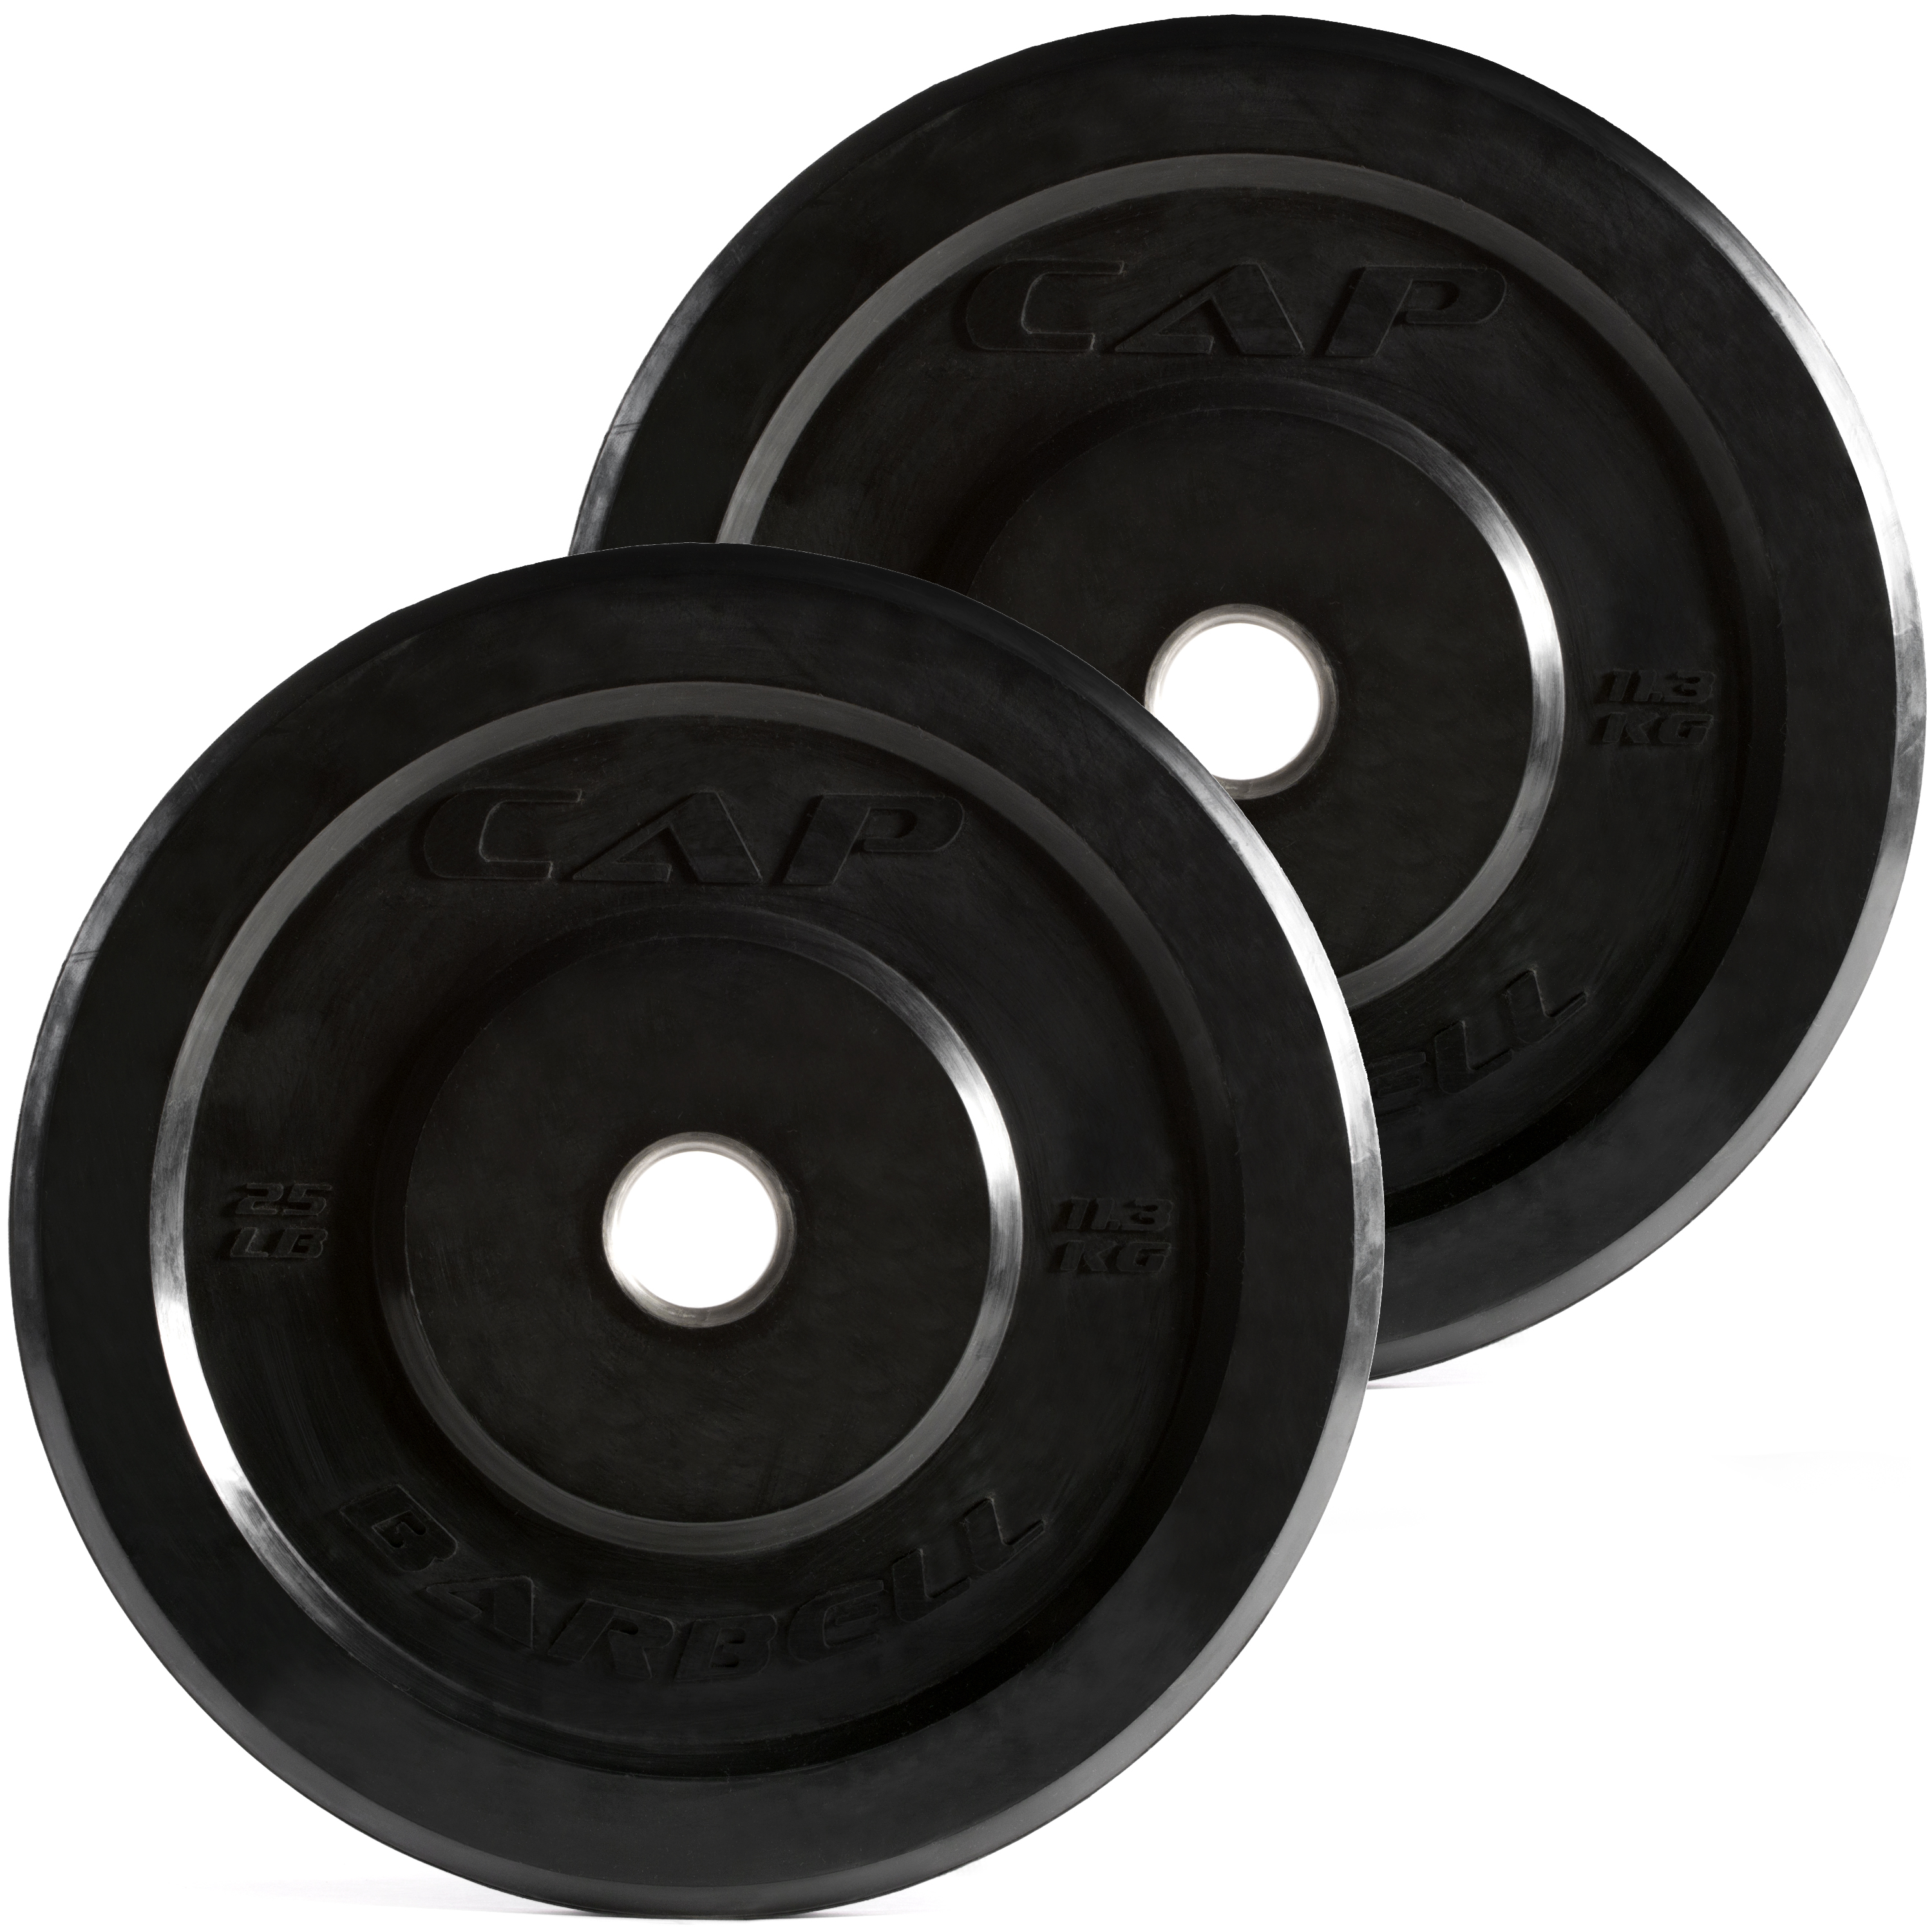 CAP Barbell - Olympic Bumper Plate Set, 20-90 Lbs. - image 1 of 2